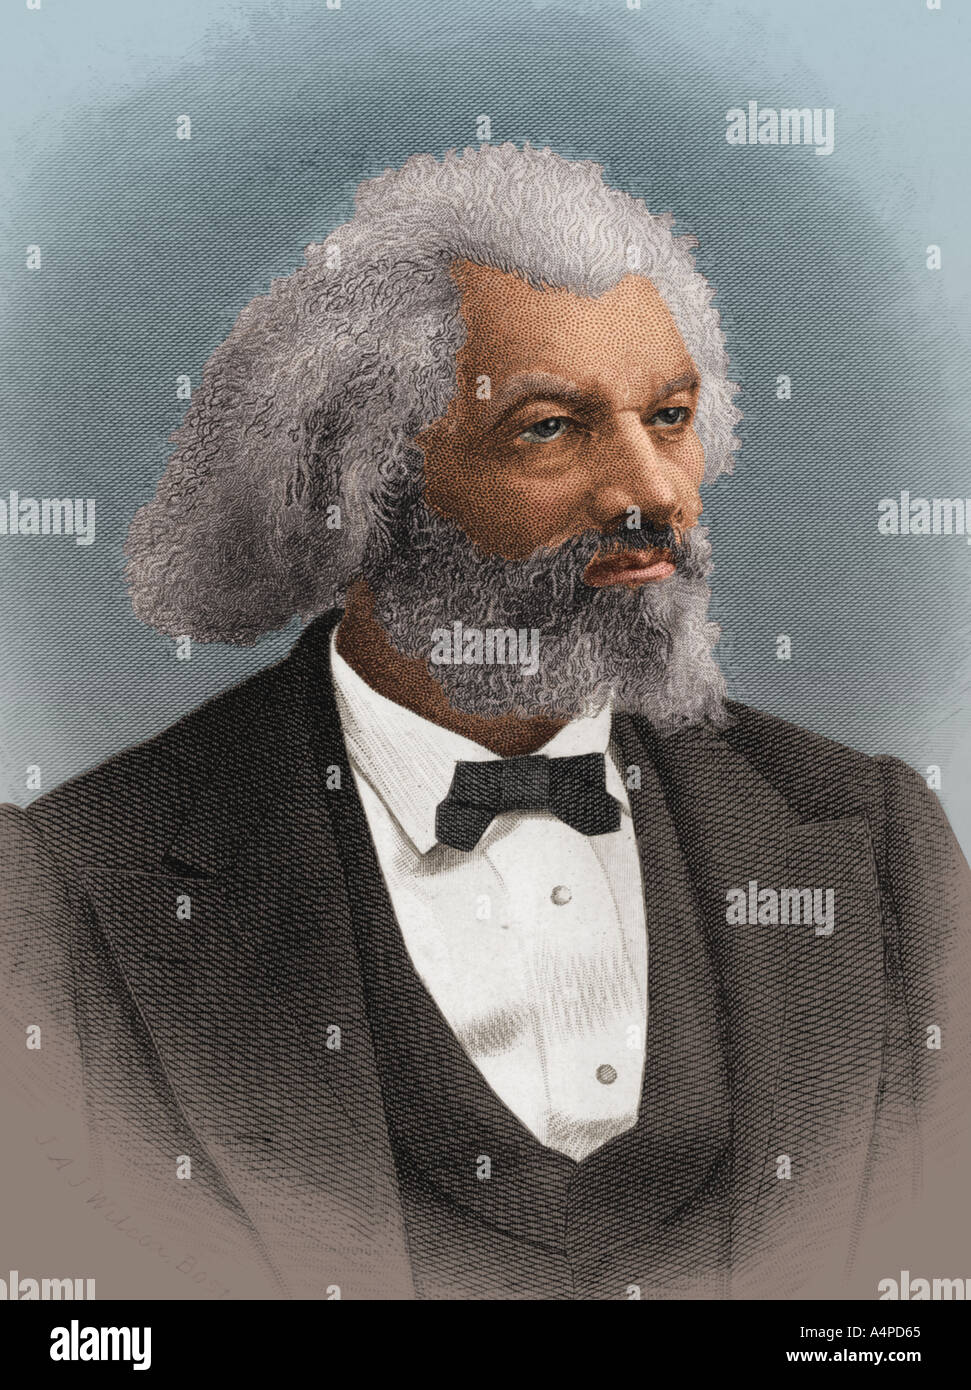 Portrait of Frederick Douglass, American abolitionist and writer. Stock Photo